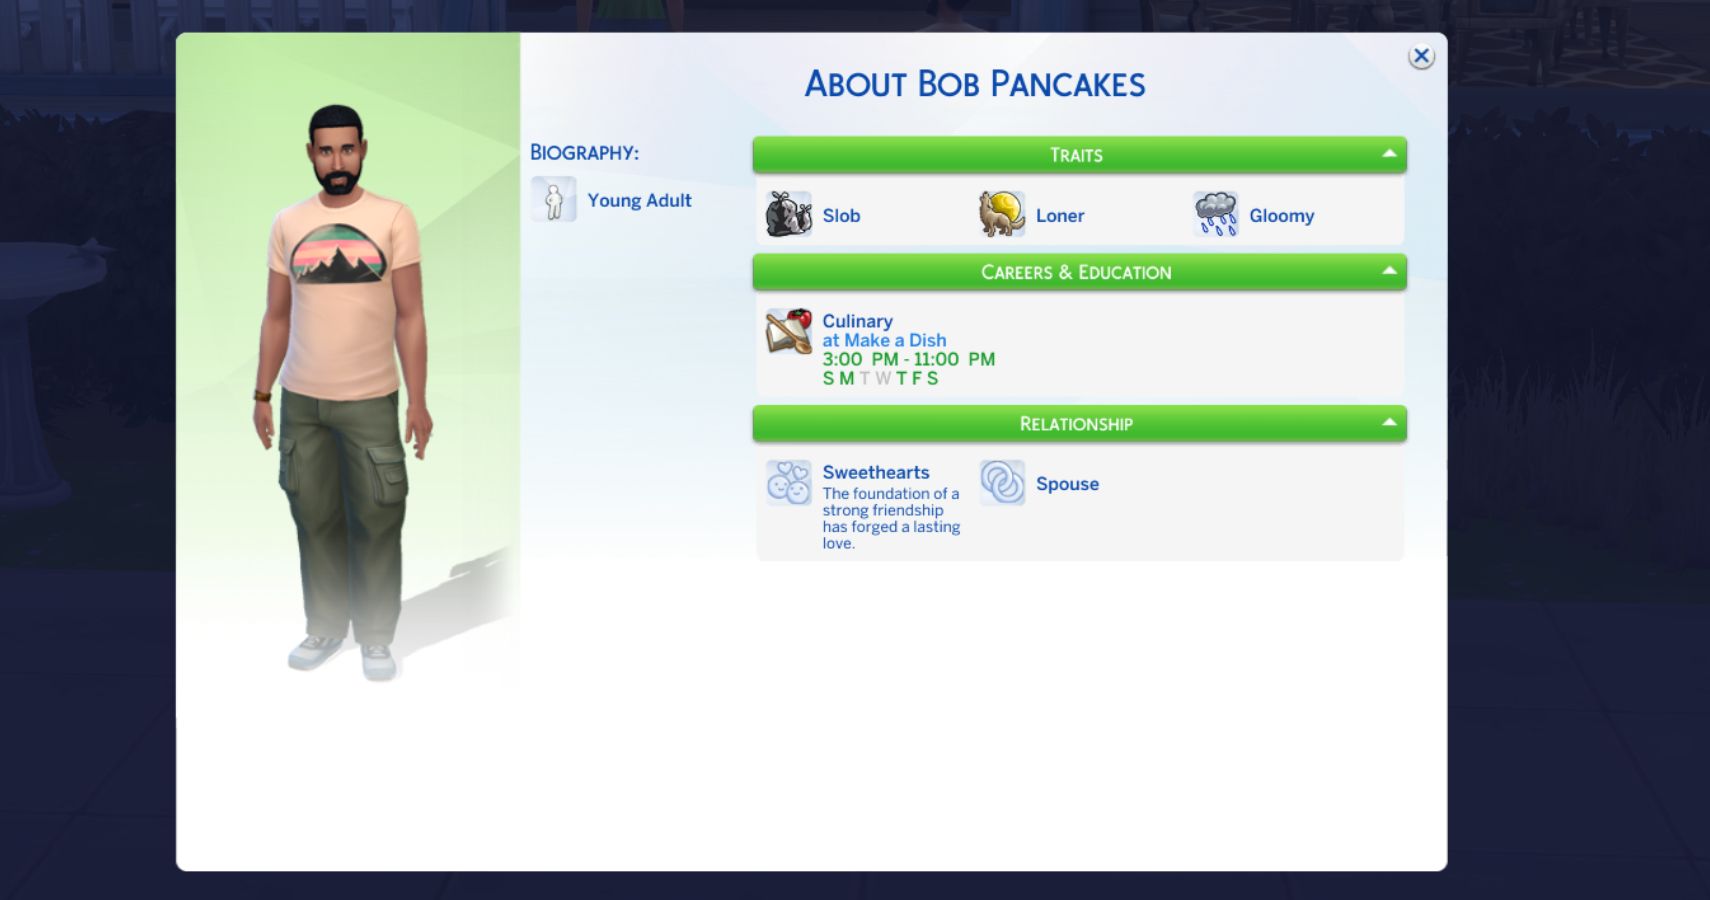 The Sims 4s Massive PreExpansion Patch Adds Some Game Changing Free Features